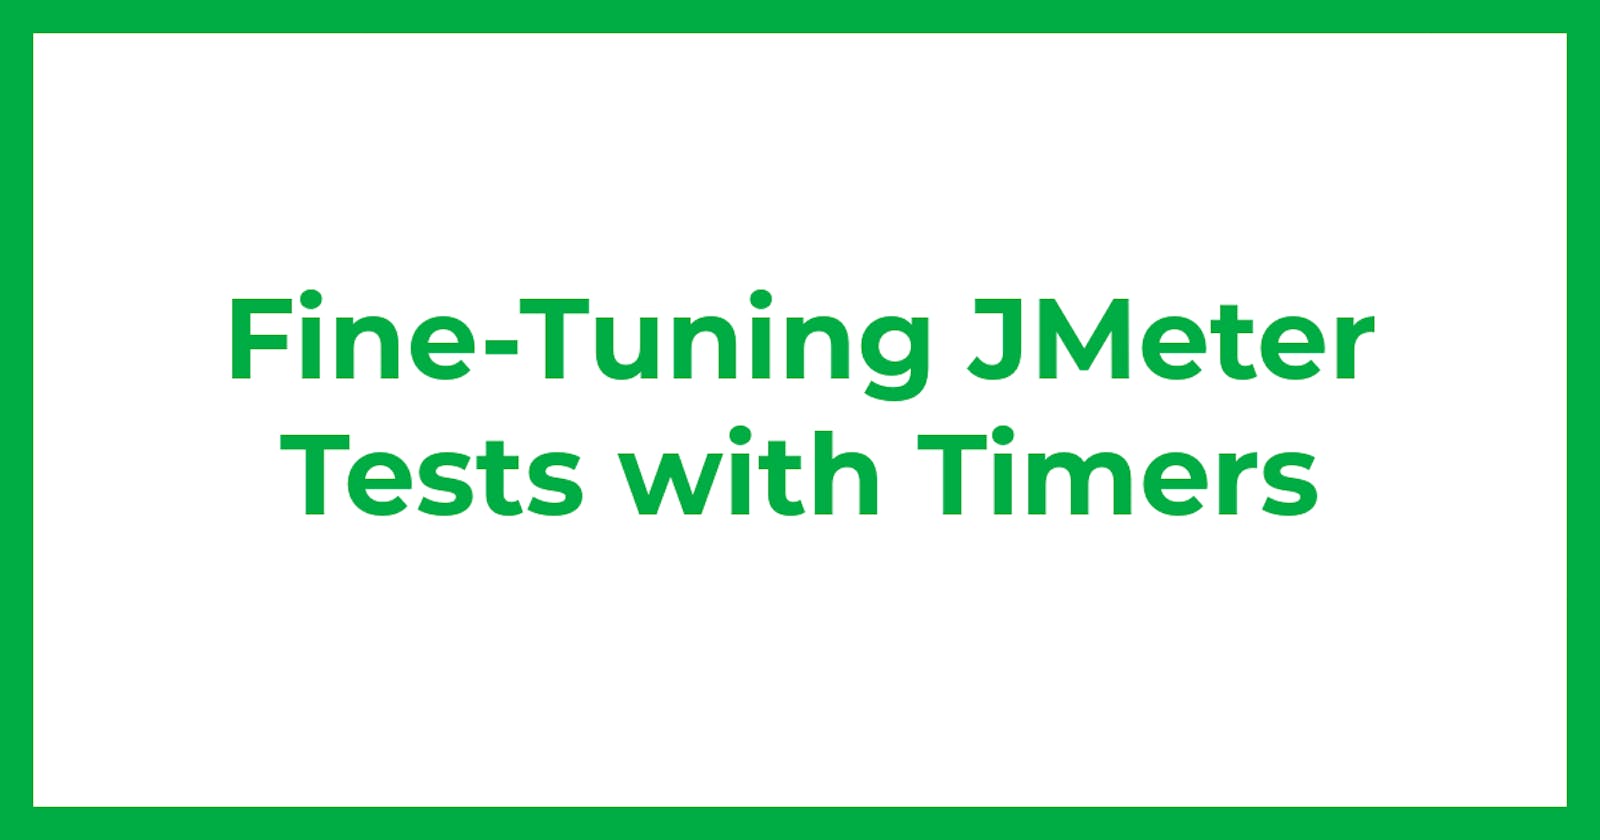 Fine-Tuning JMeter Tests with Timers